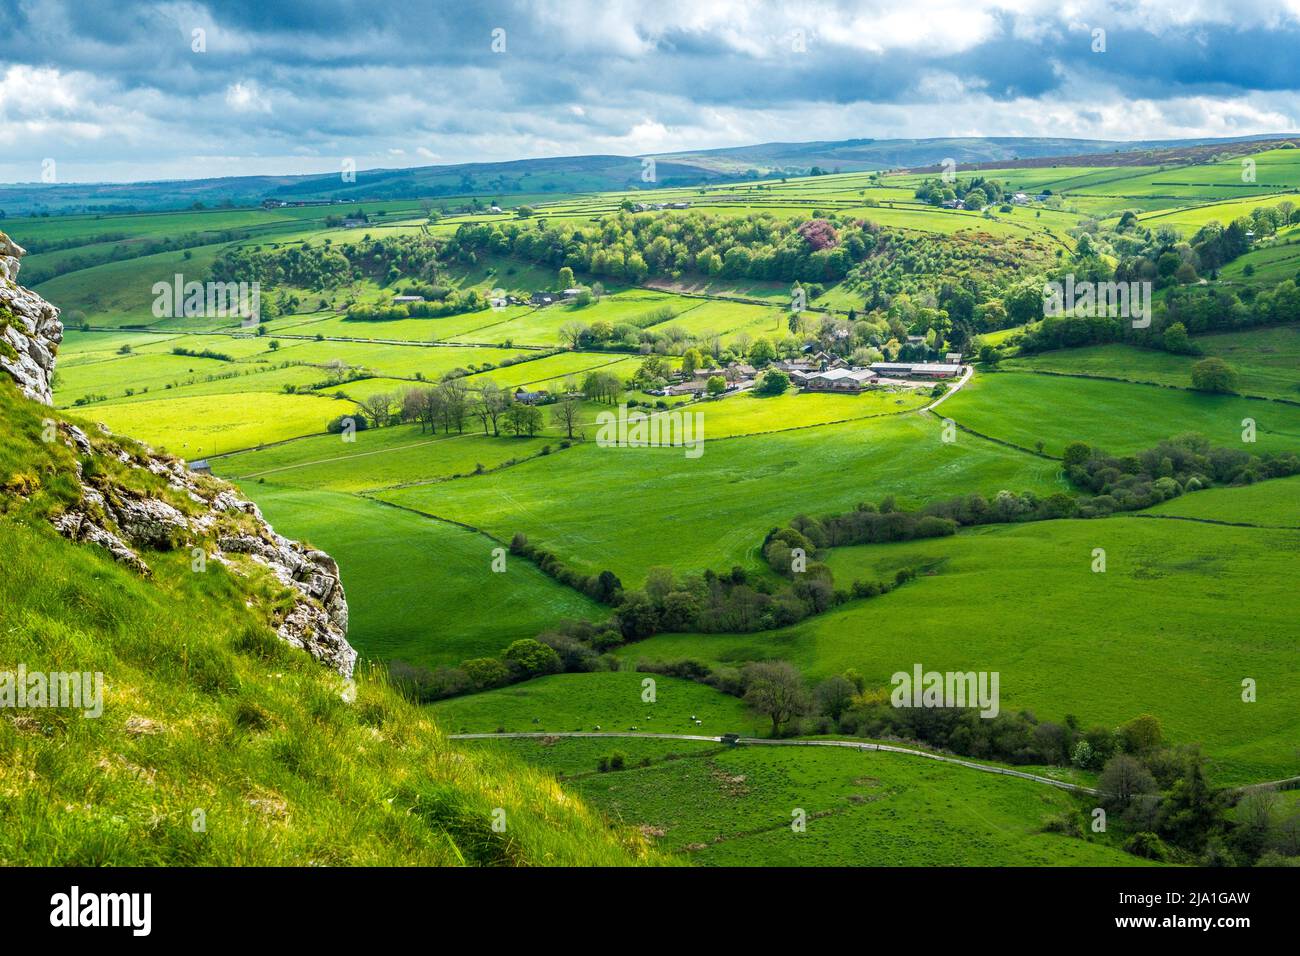 The village of Hollinsclough in the Peak District National Park Stock Photo